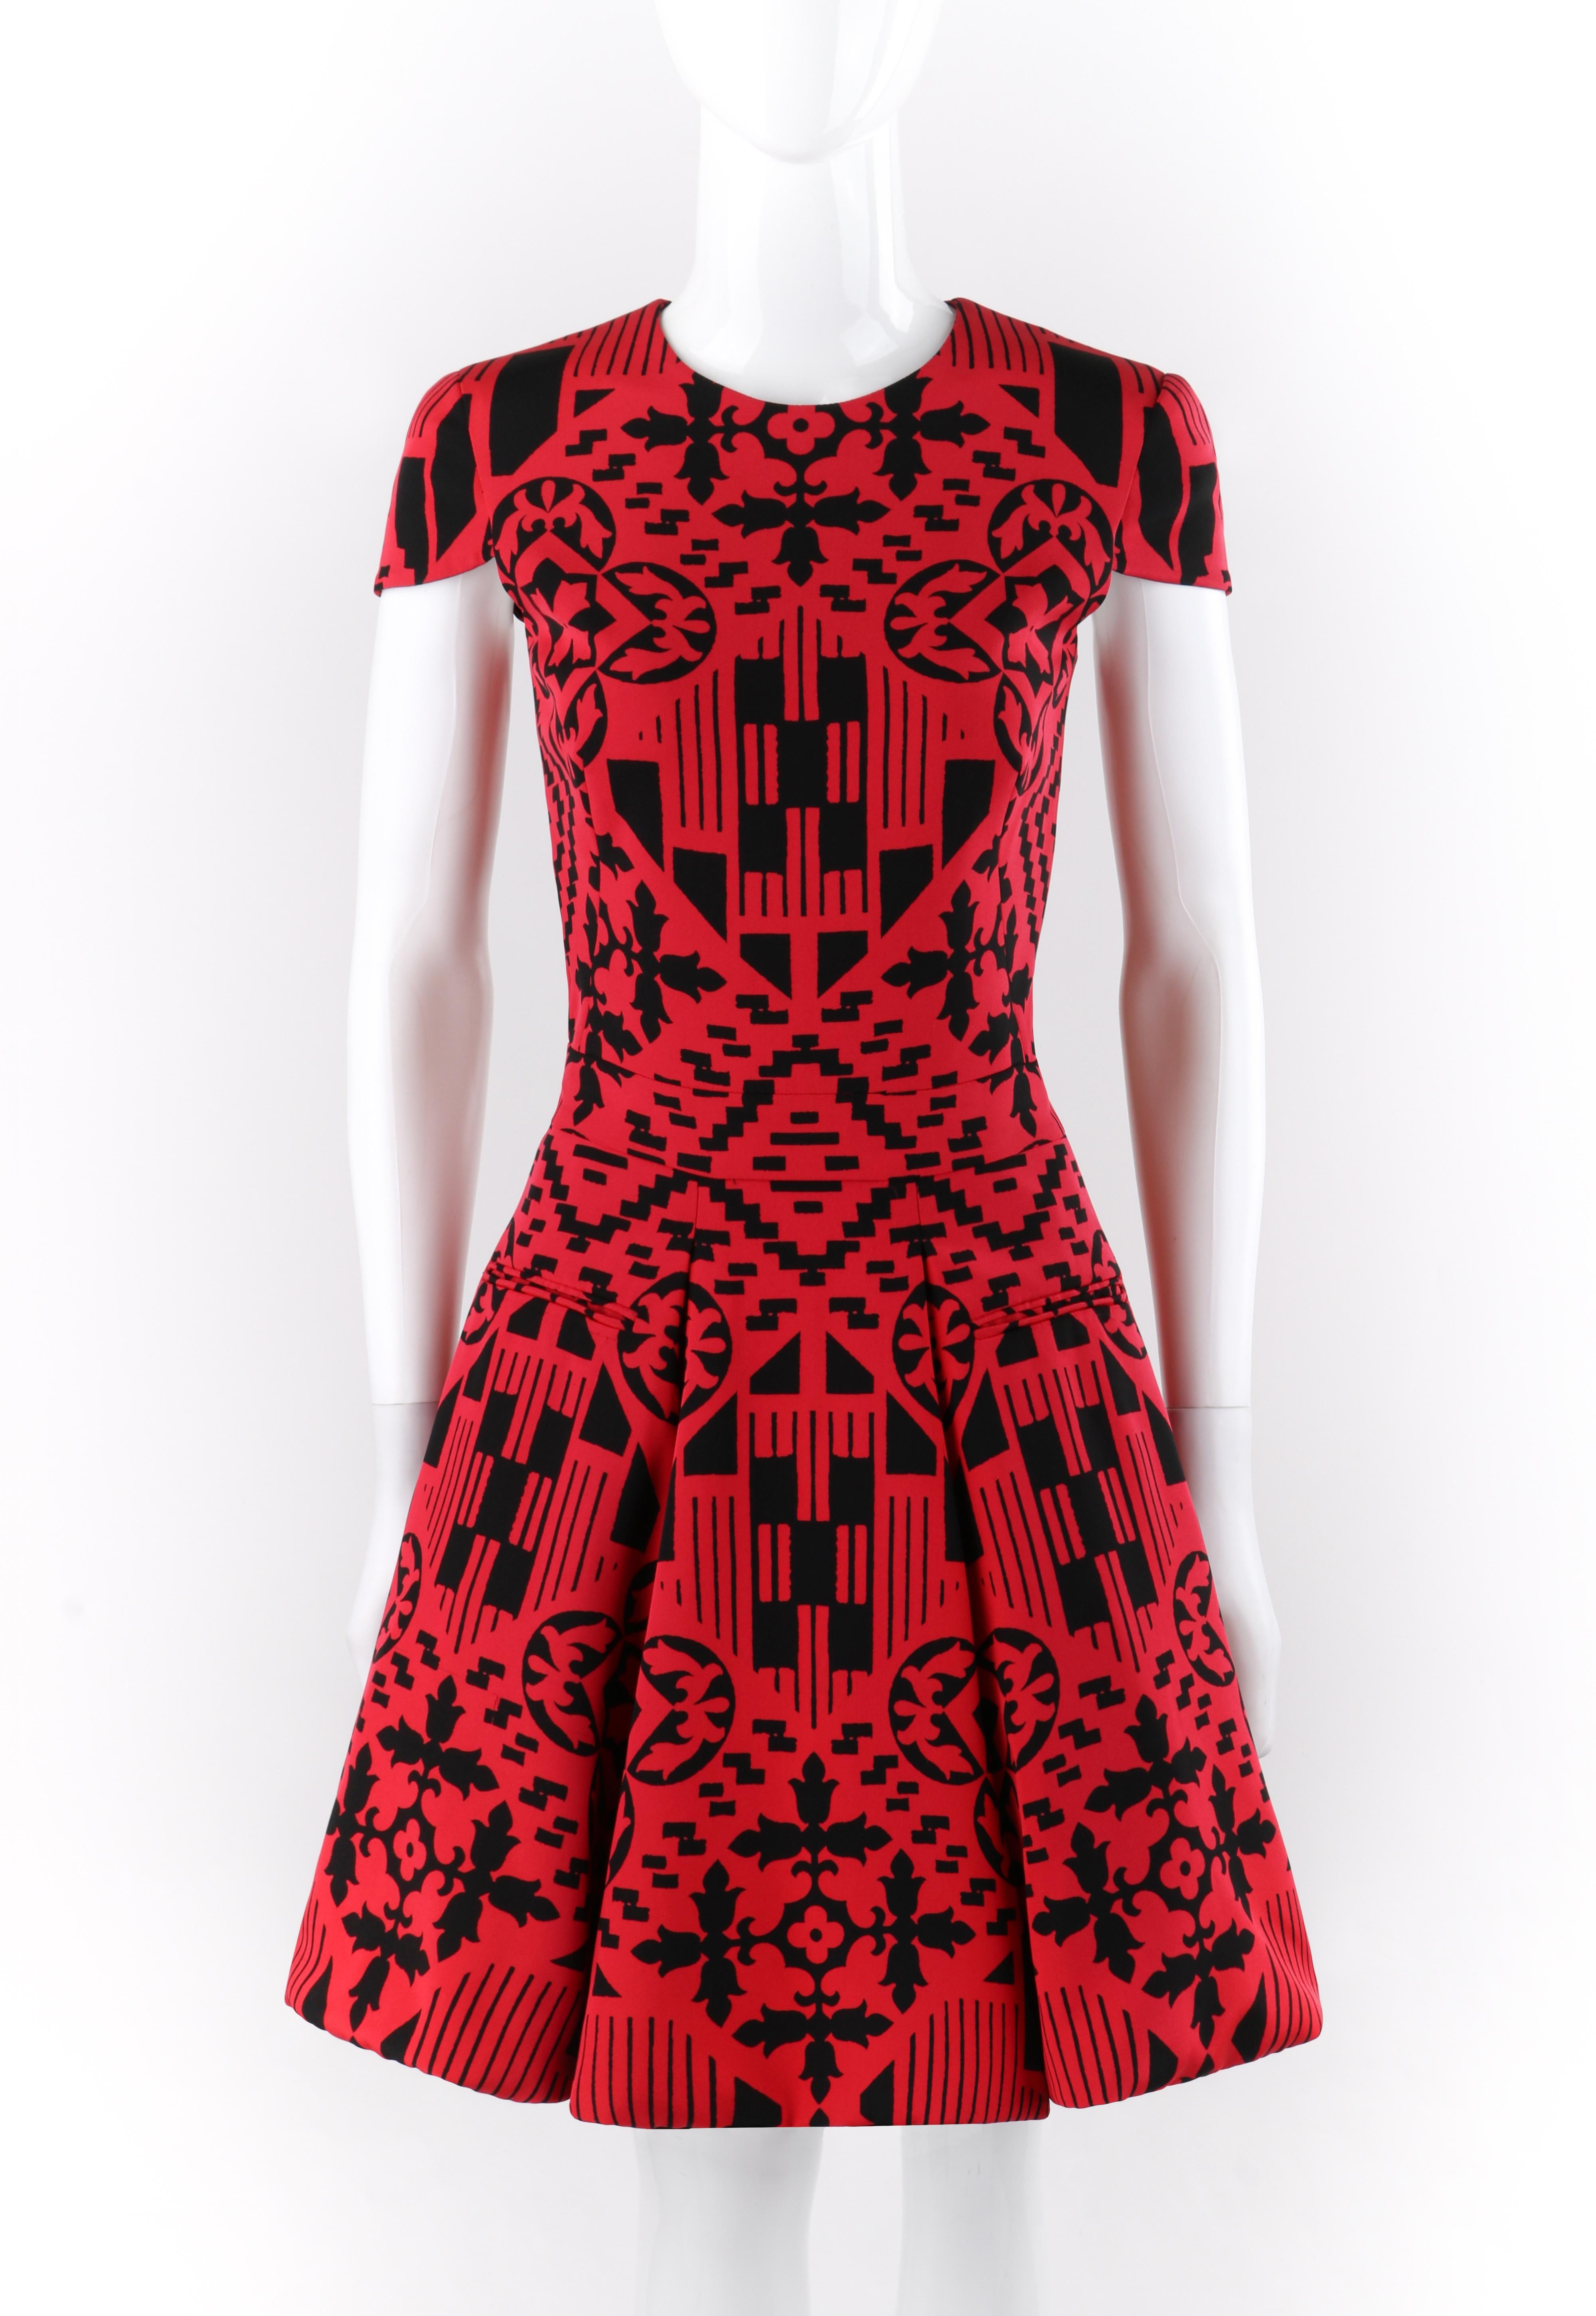 ALEXANDER McQUEEN S/S 2014 Red Black Mosaic Shape Print Fit N Flare Skater Dress

Brand / Manufacturer: Alexander McQueen
Collection: S/S 2014 
Designer: Sarah Burton
Style: Pleated fit n flare skater style dress; cap sleeves
Color(s): Red and